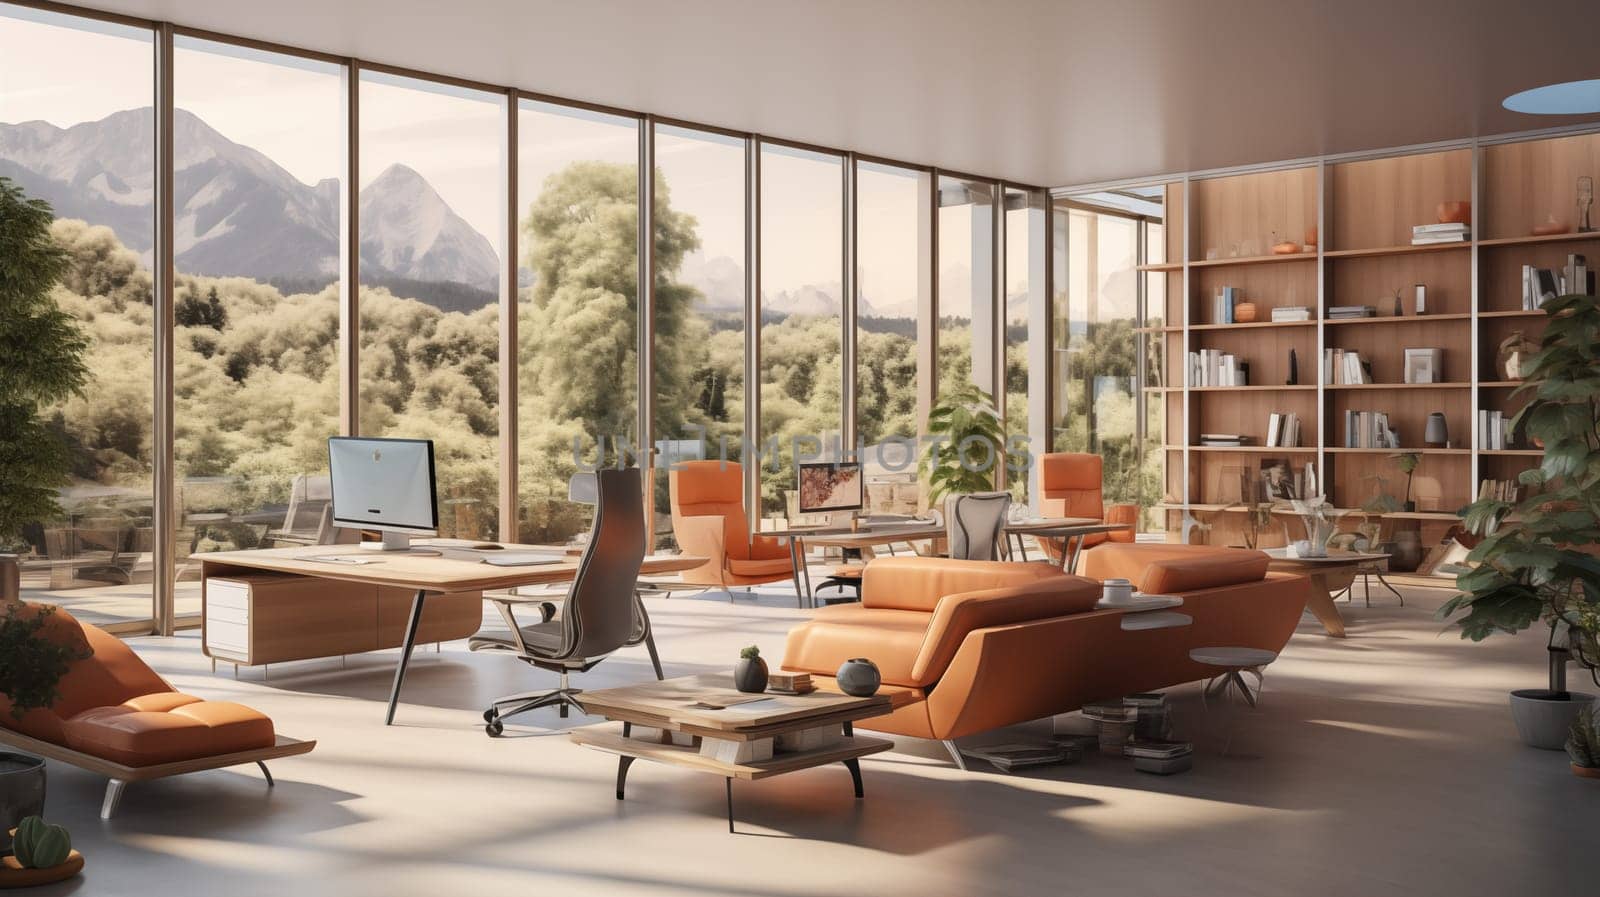 Modern Office Interior with Mountain View,Sleek workspace with large windows , filled with stylish furniture and plants.